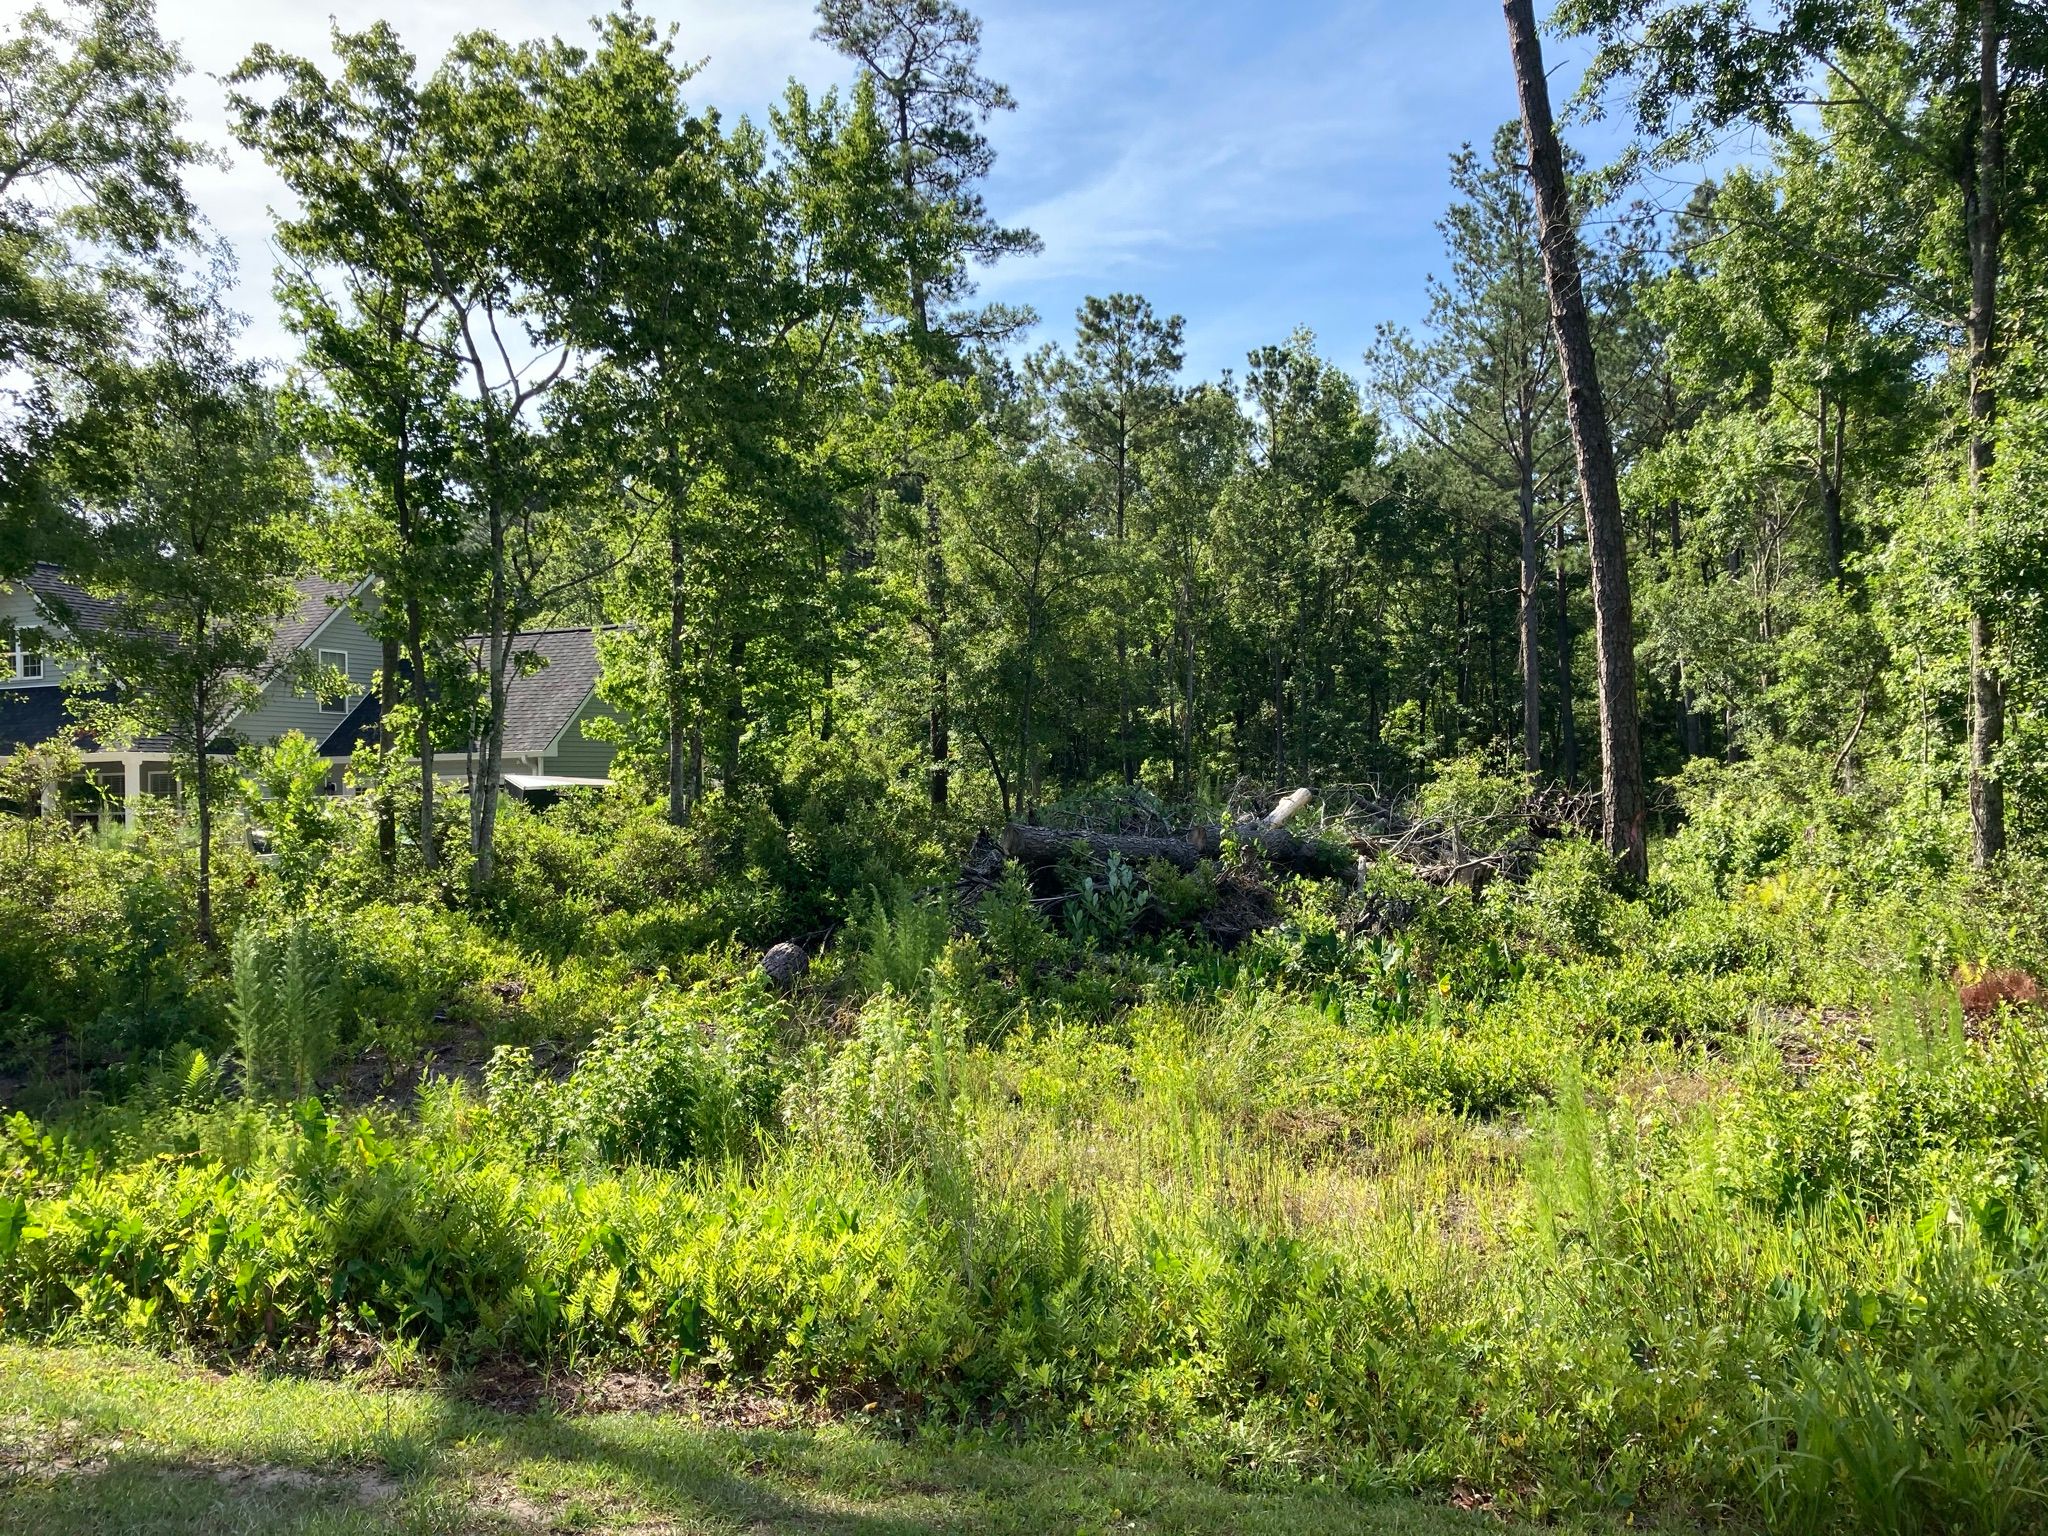 Land clearing for CW Earthworks, LLC in Charleston, South Carolina